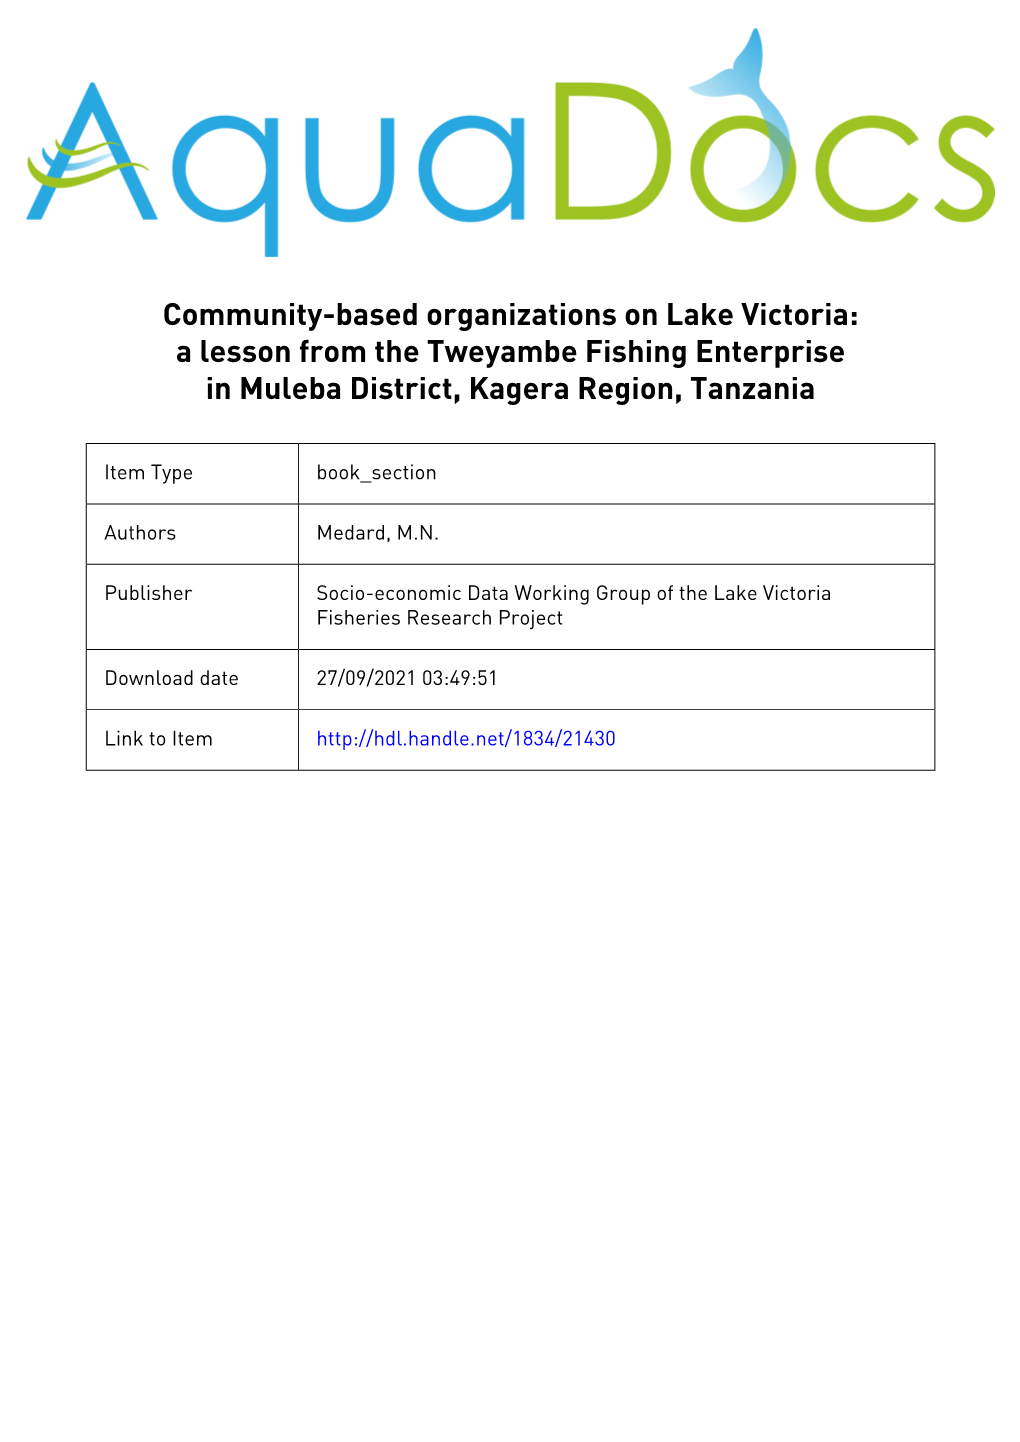 Community-Based Organisations on Lake Victoria: a Lesson from the Tweyarnbe Fishing Enterprise in Muleba District, Kagera Region, Tanzania'